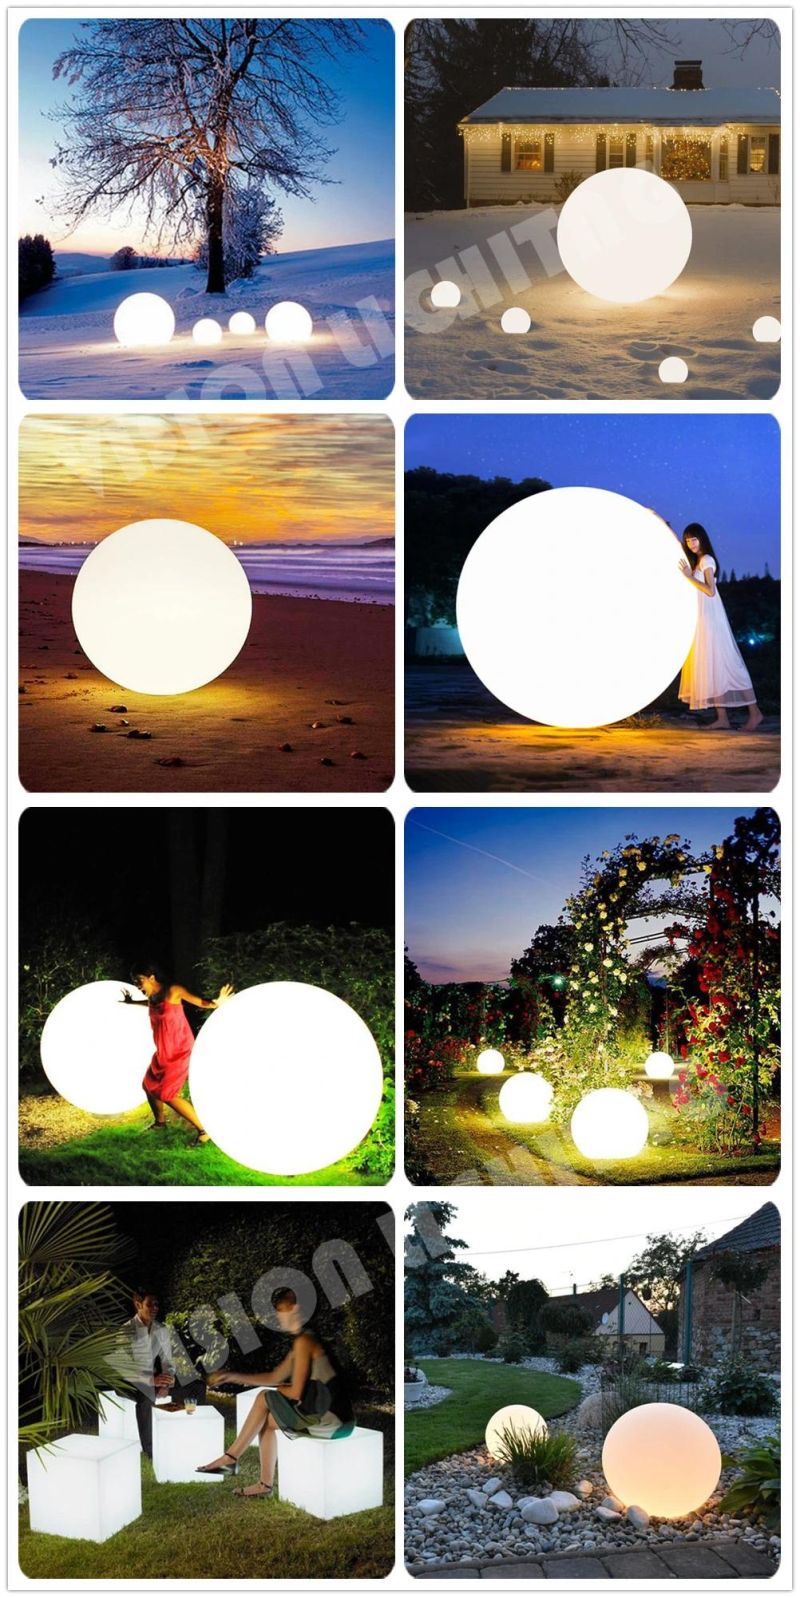 Portable Changeable Night Ball Light for Patio and Garden Decoration